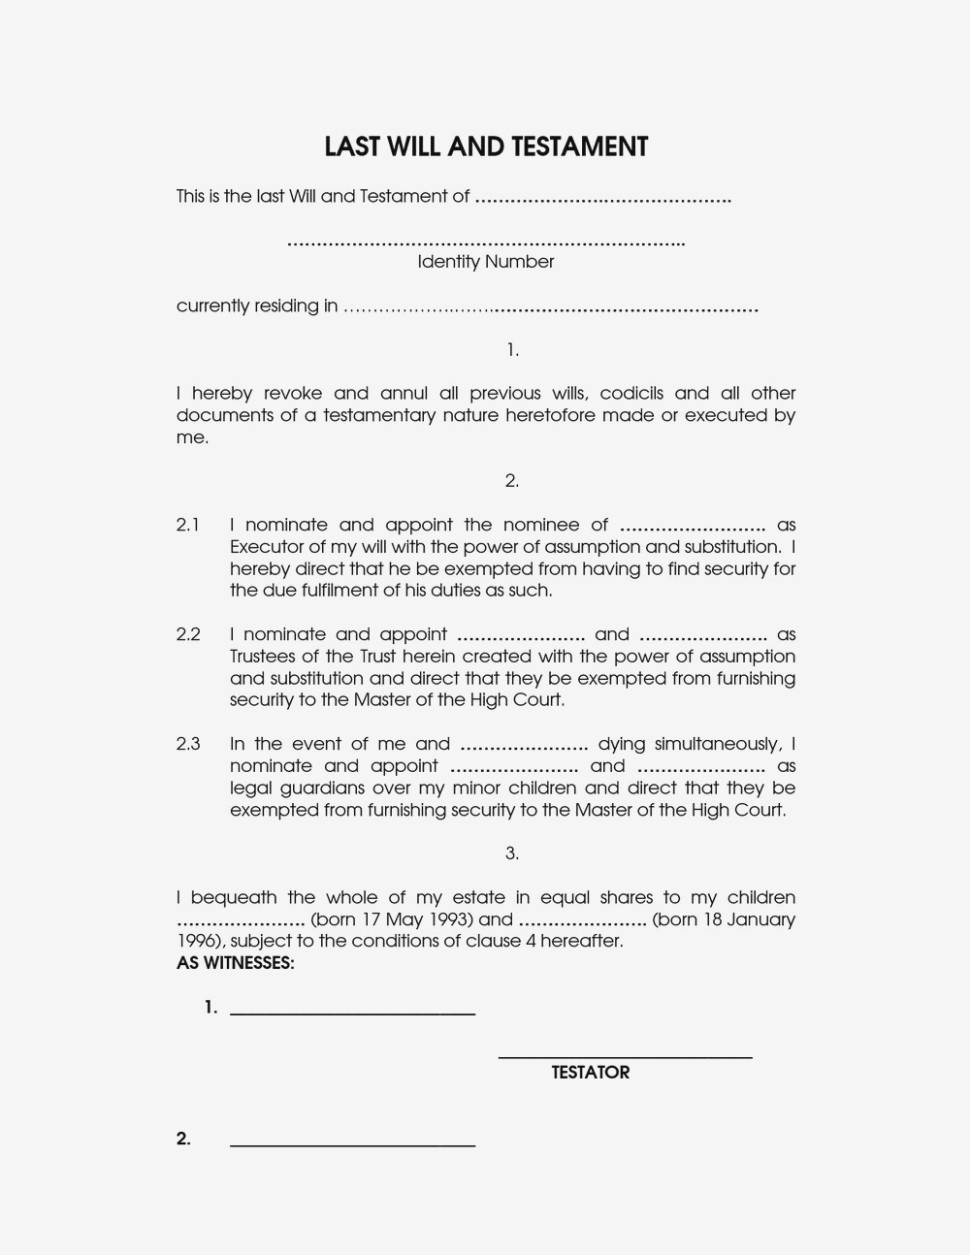 Free Printable Last Will And Testament Forms Uk | Resume Examples - Free Printable Last Will And Testament Blank Forms